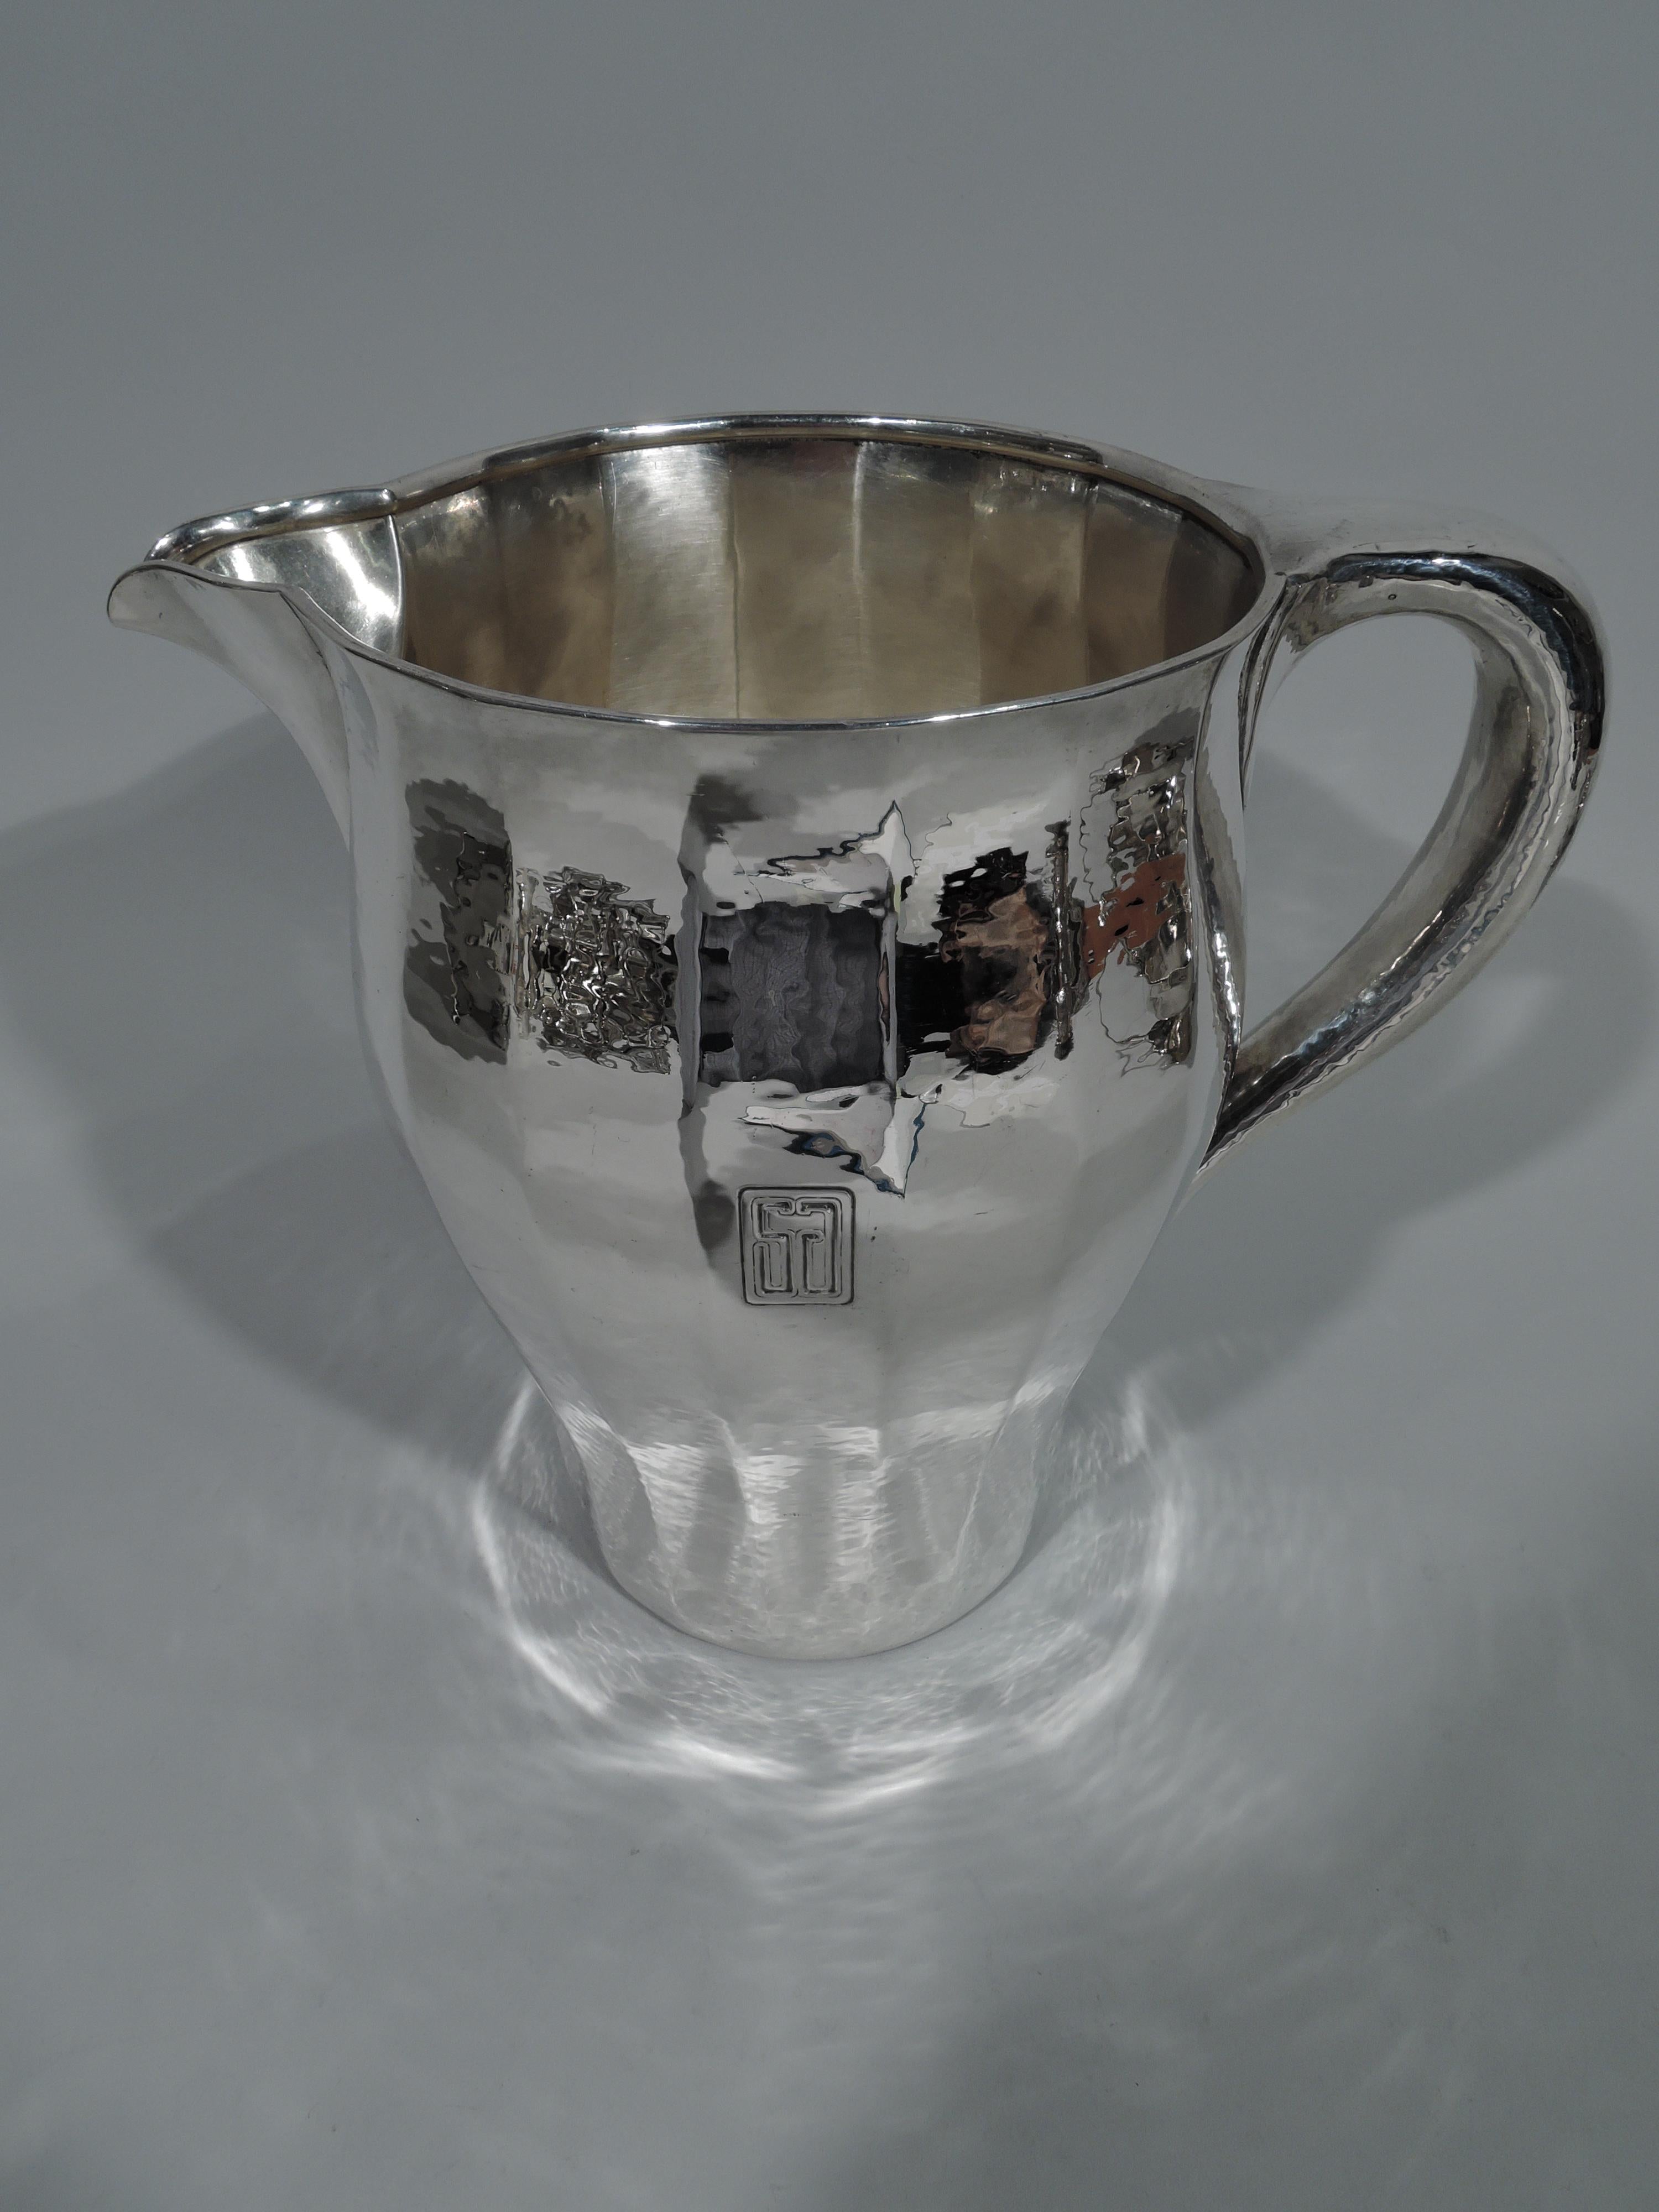 Craftsman hand-hammered sterling silver water pitcher. Made by Tiffany & Co. in New York, circa 1909. Softly faceted baluster with V-spout and C-scroll handle. Nice rippling shimmer. Rectangular frame with two-letter monogram. Fully marked including